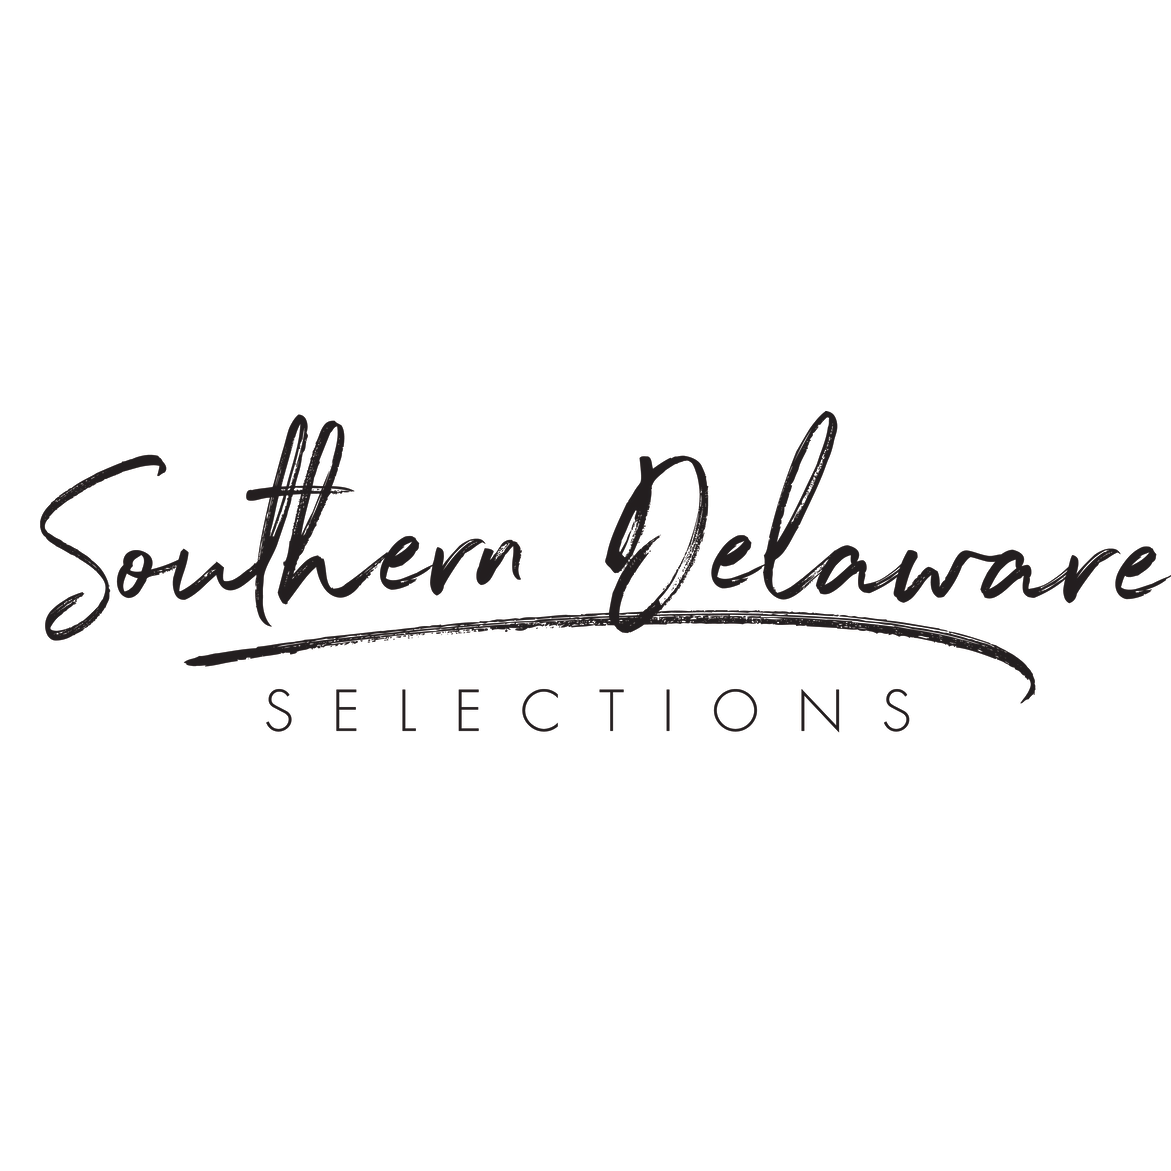 Southern Delaware Selections Logo